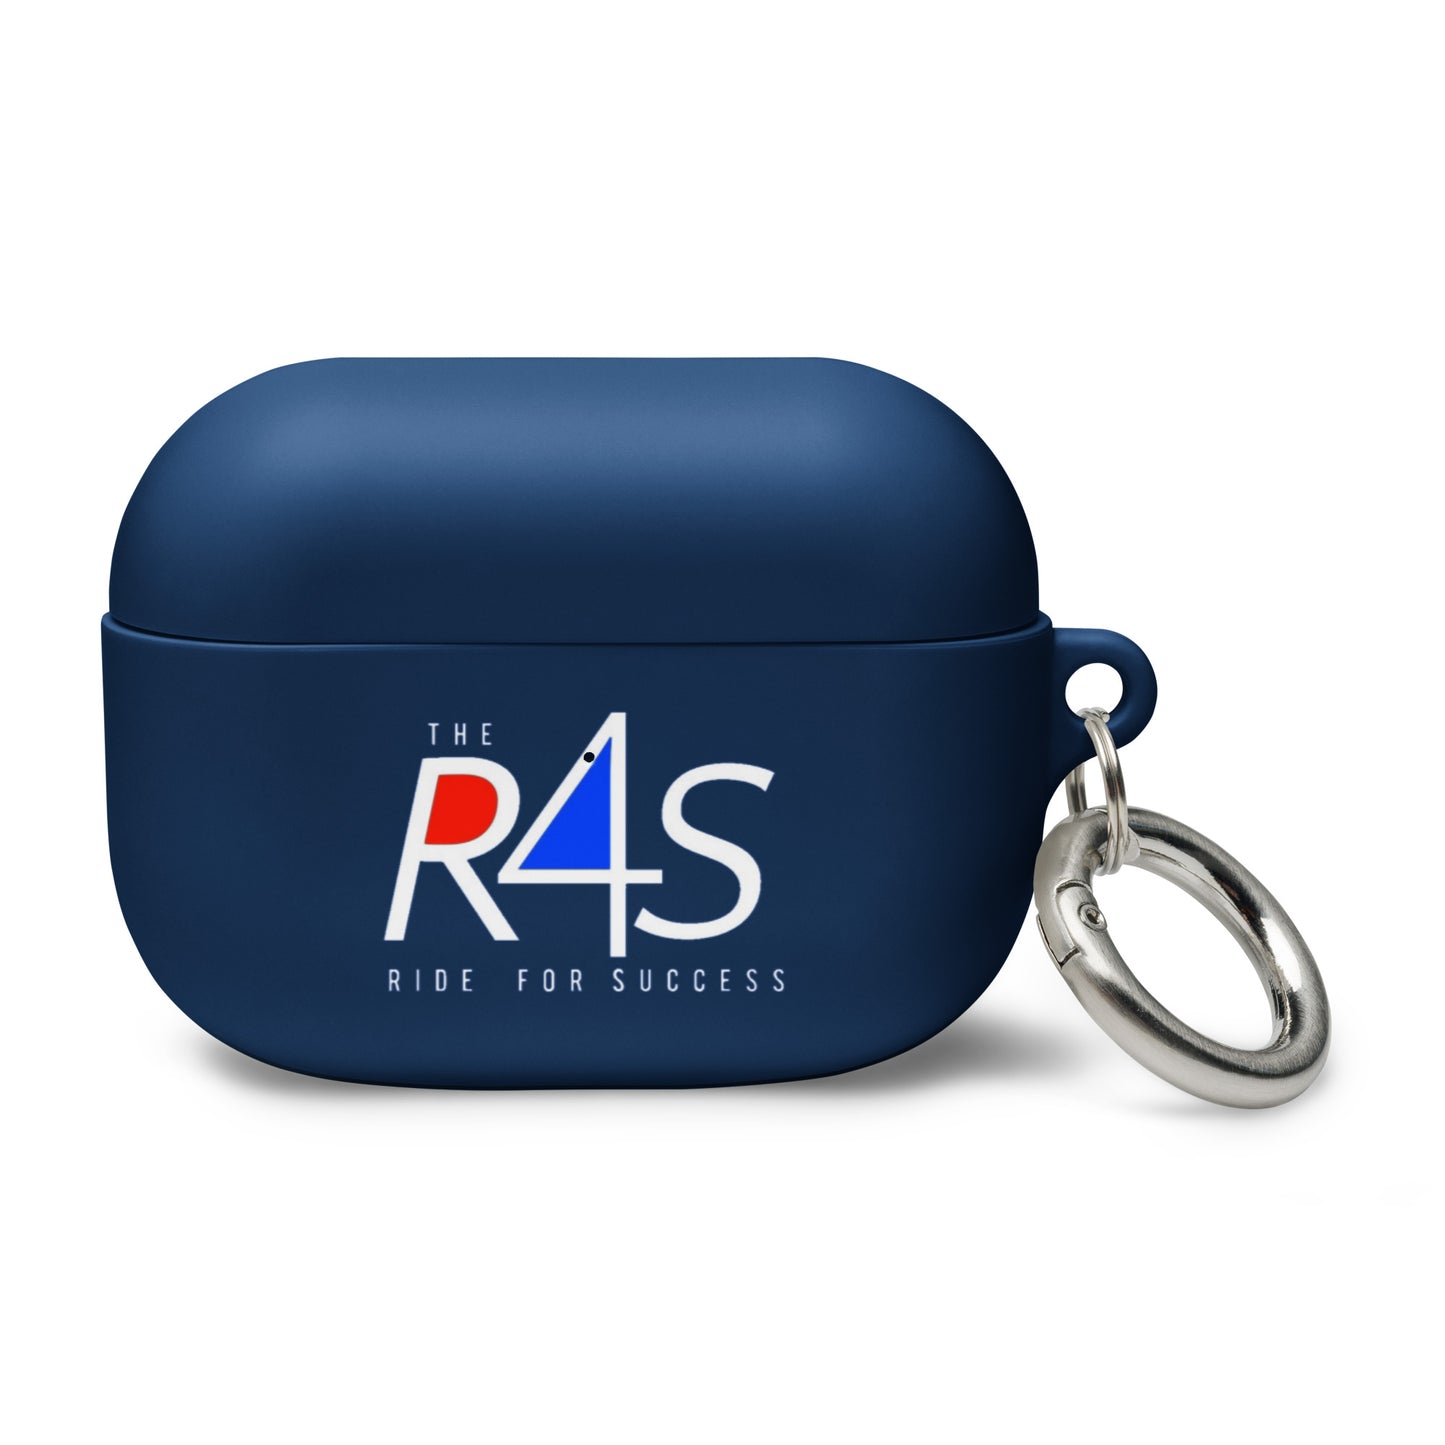 The R4S AirPods case